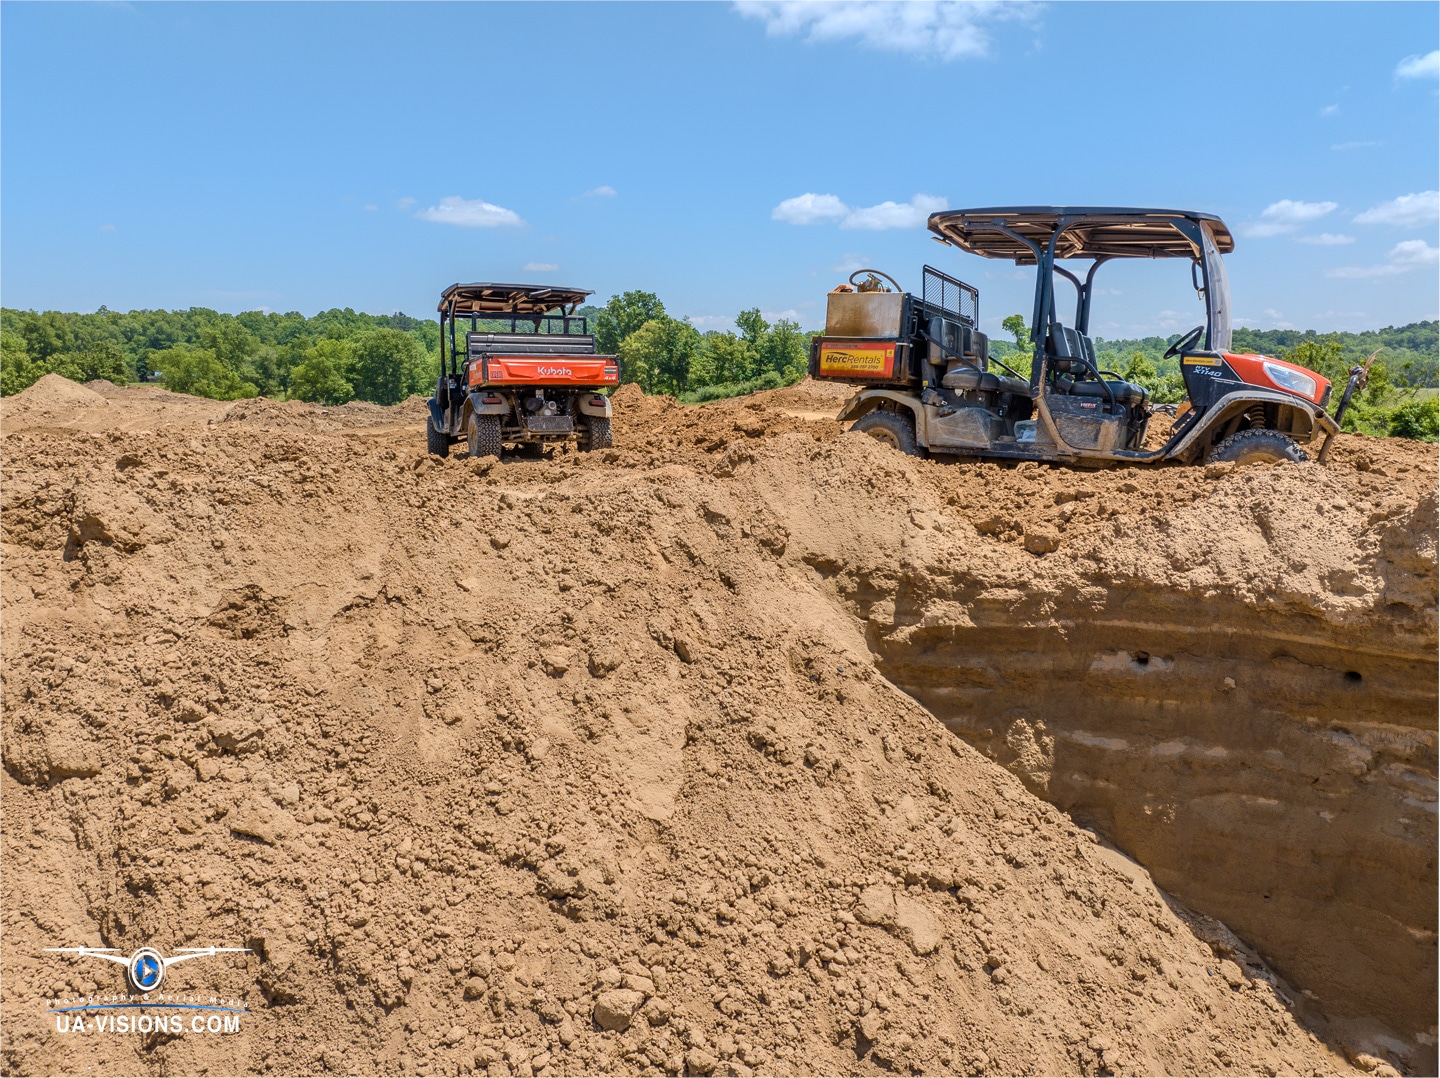 UA-Visions captures a moment of solitude with a Kubota perched atop a mound, shaping Ashton's landscape.